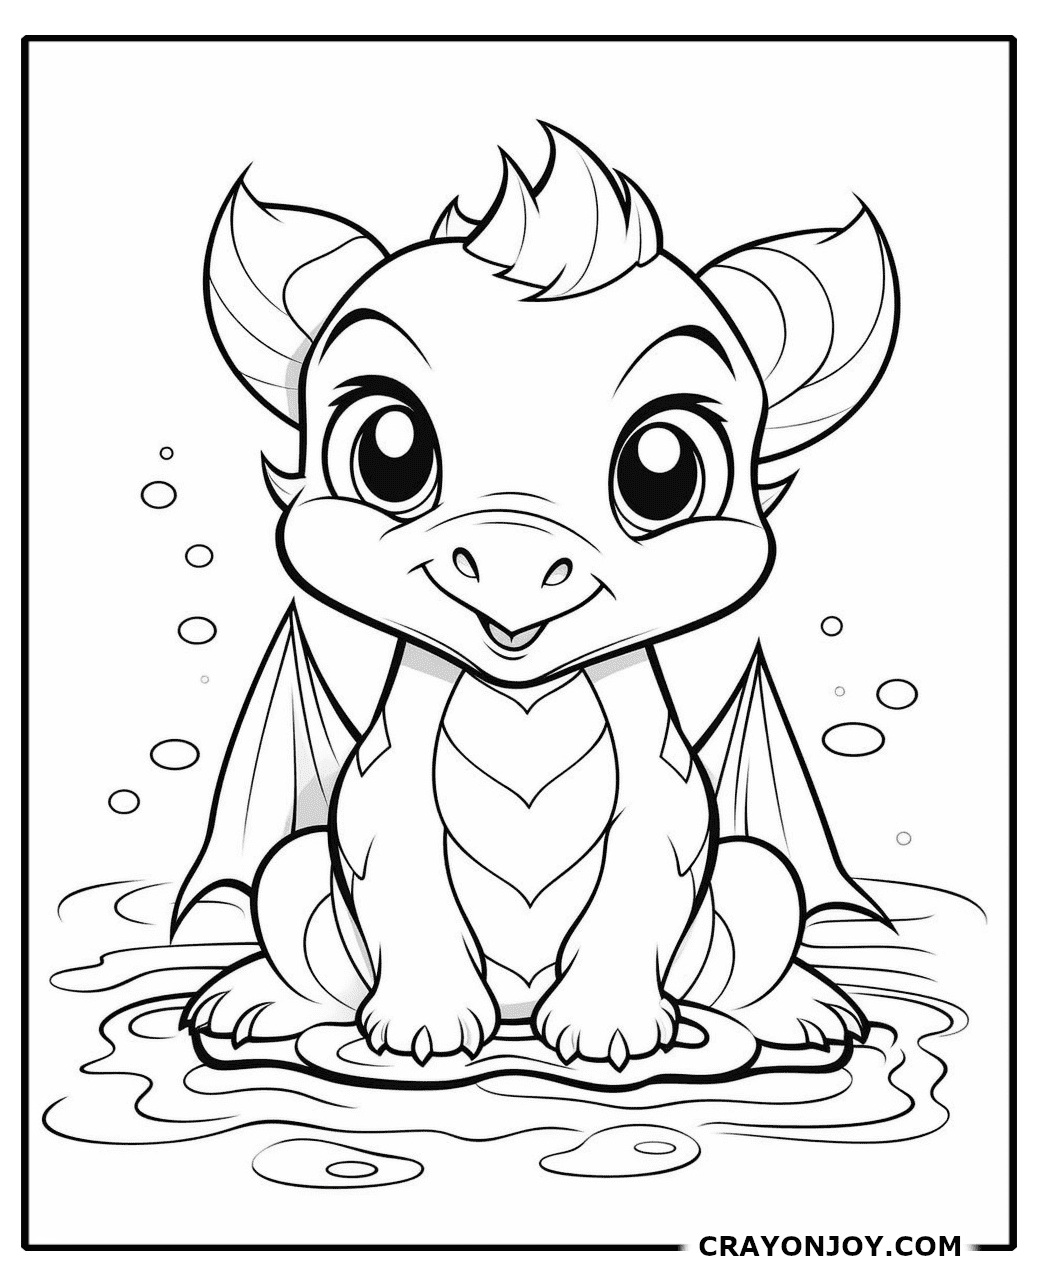 Free Printable Water Dragon Coloring Pages for Kids & Adults